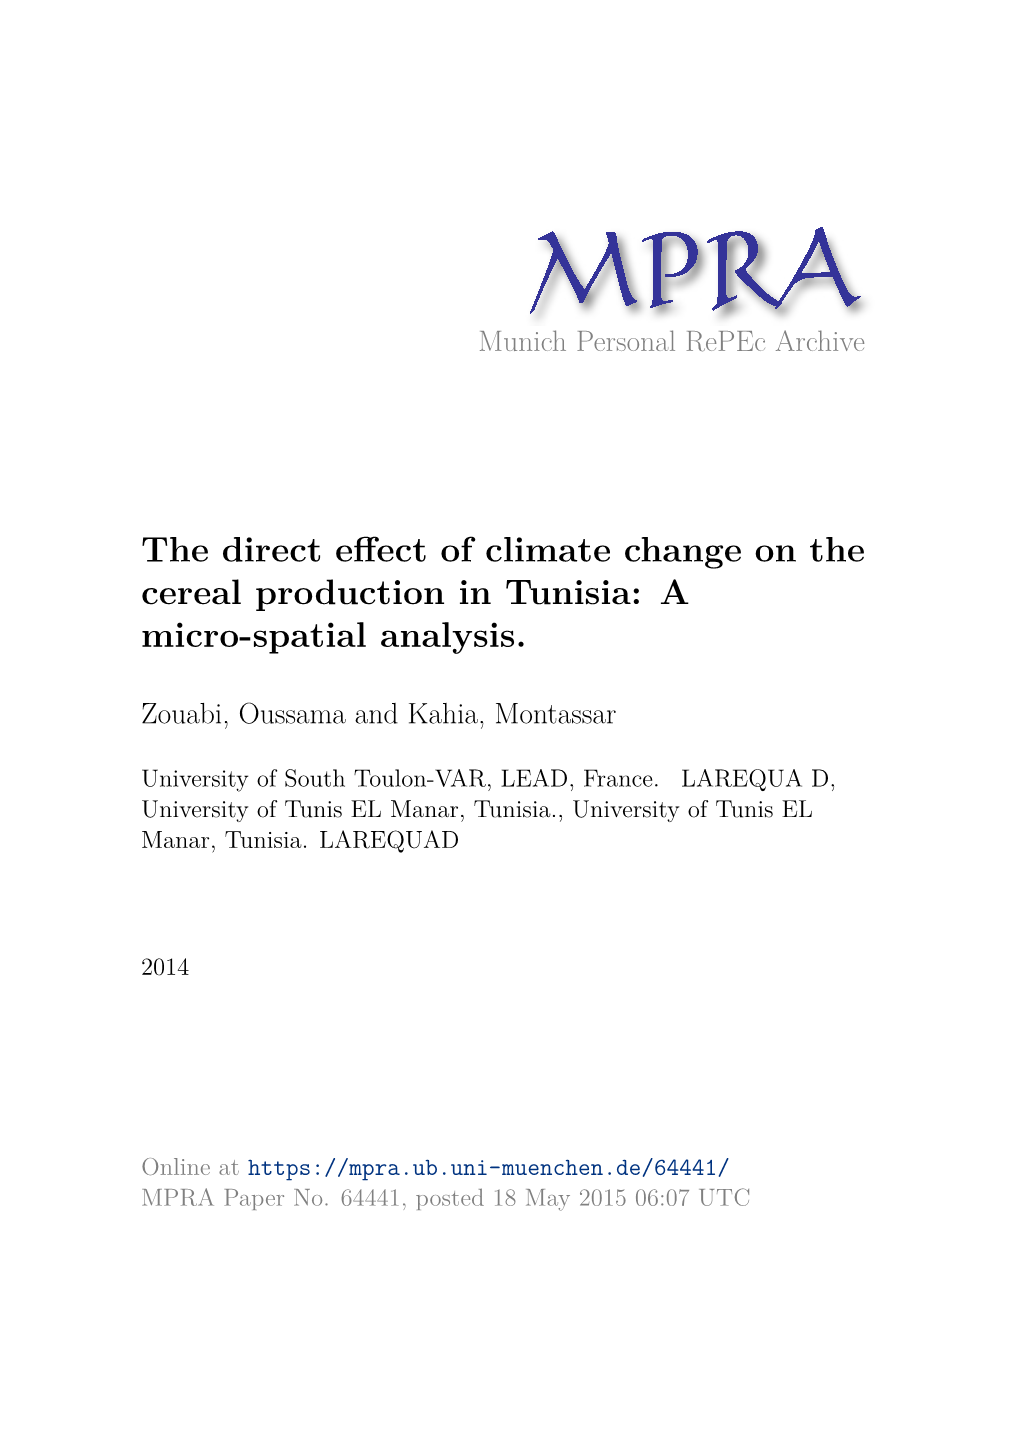 The Direct Effect of Climate Change on the Cereal Production in Tunisia